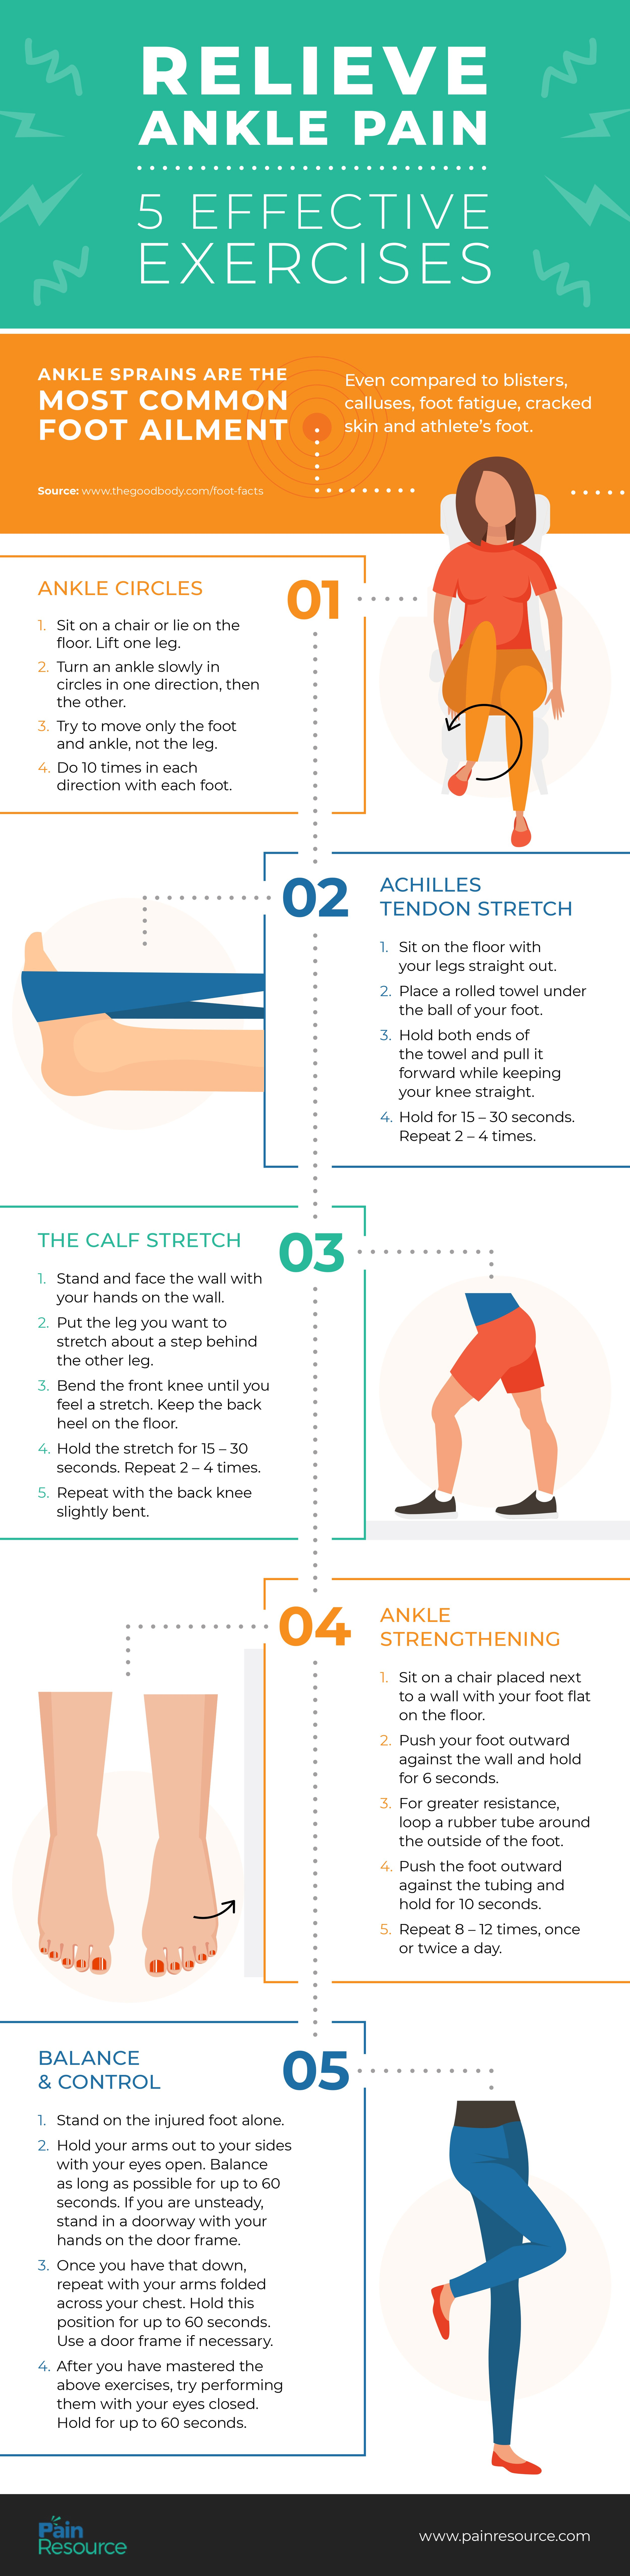 How to relive ankle pain